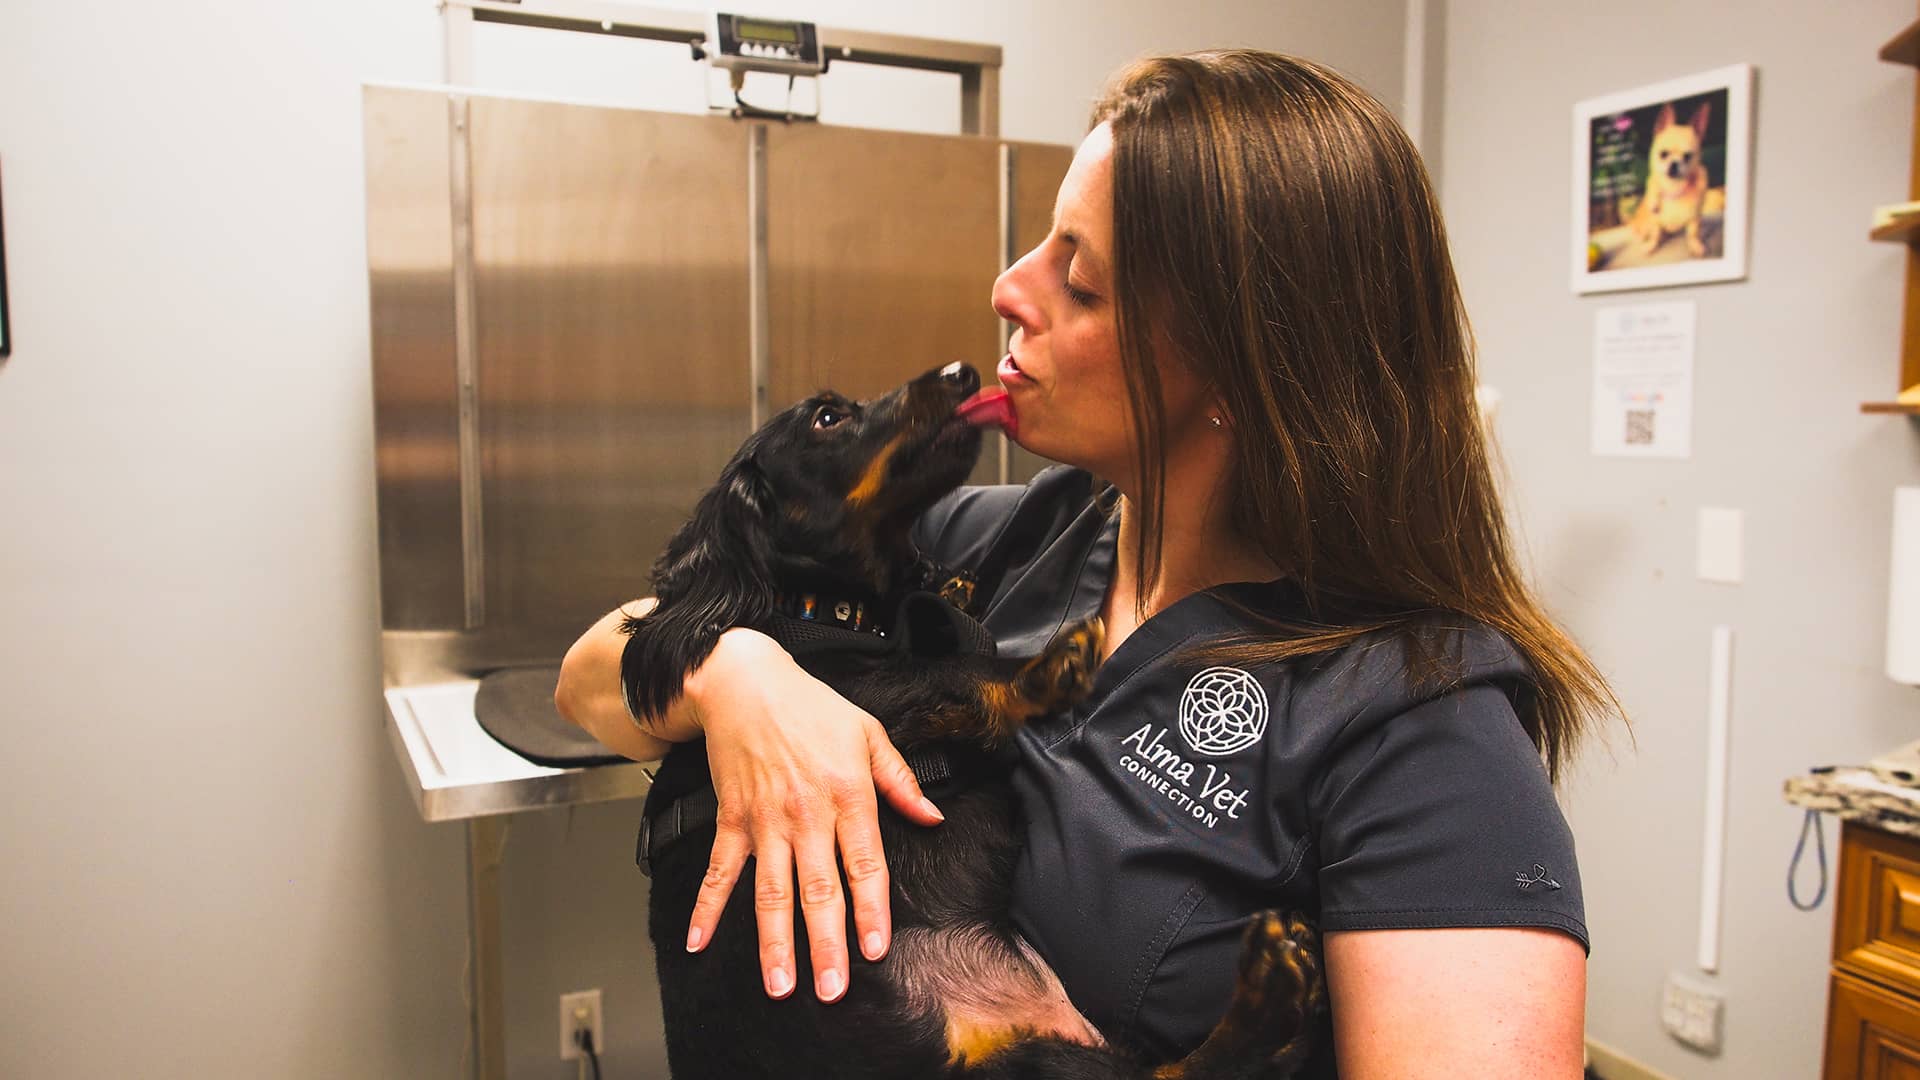 A veterinarian wearing an "Alma Vet Connection" uniform is lovingly holding a small black and tan Dachshund. The dog is licking the vet's face, and the vet is smiling warmly, showing a close bond between them. In the background, there is a stainless steel examination table and a wall with a framed picture of a dog and some informational posters. The scene captures a moment of affection and care in a veterinary setting.